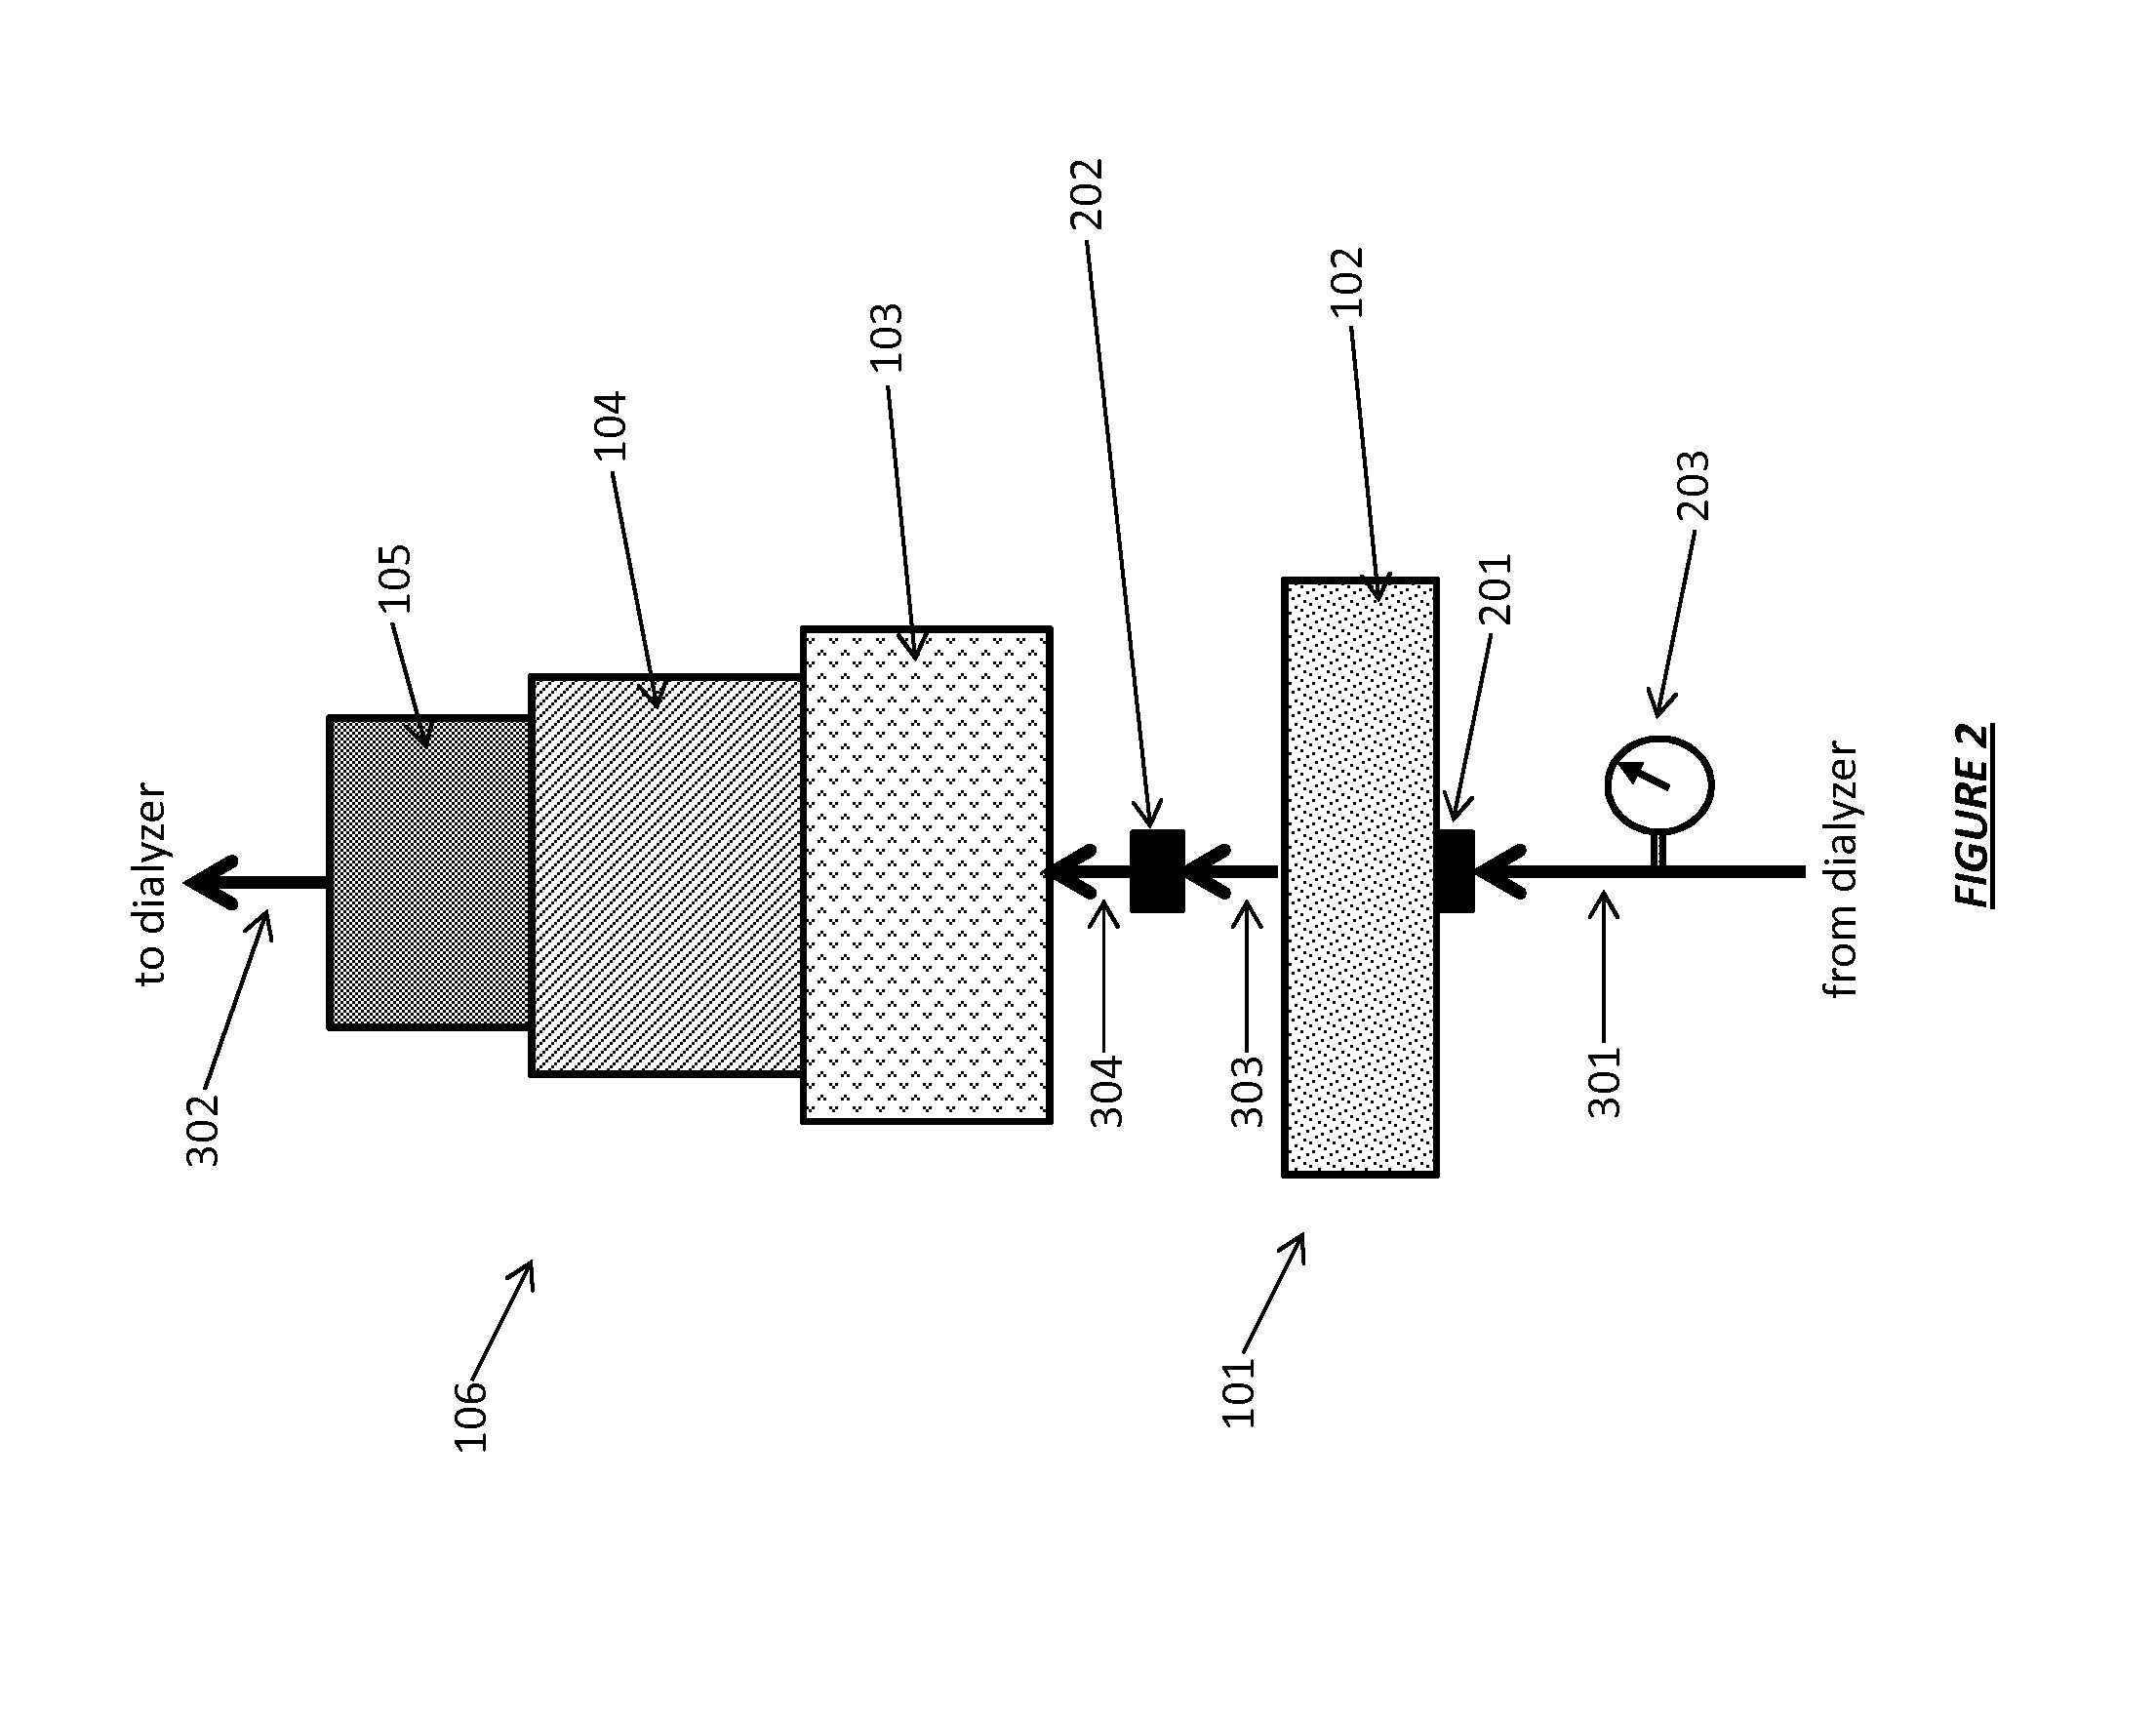 Fluid circuits for sorbent cartridge with sensors